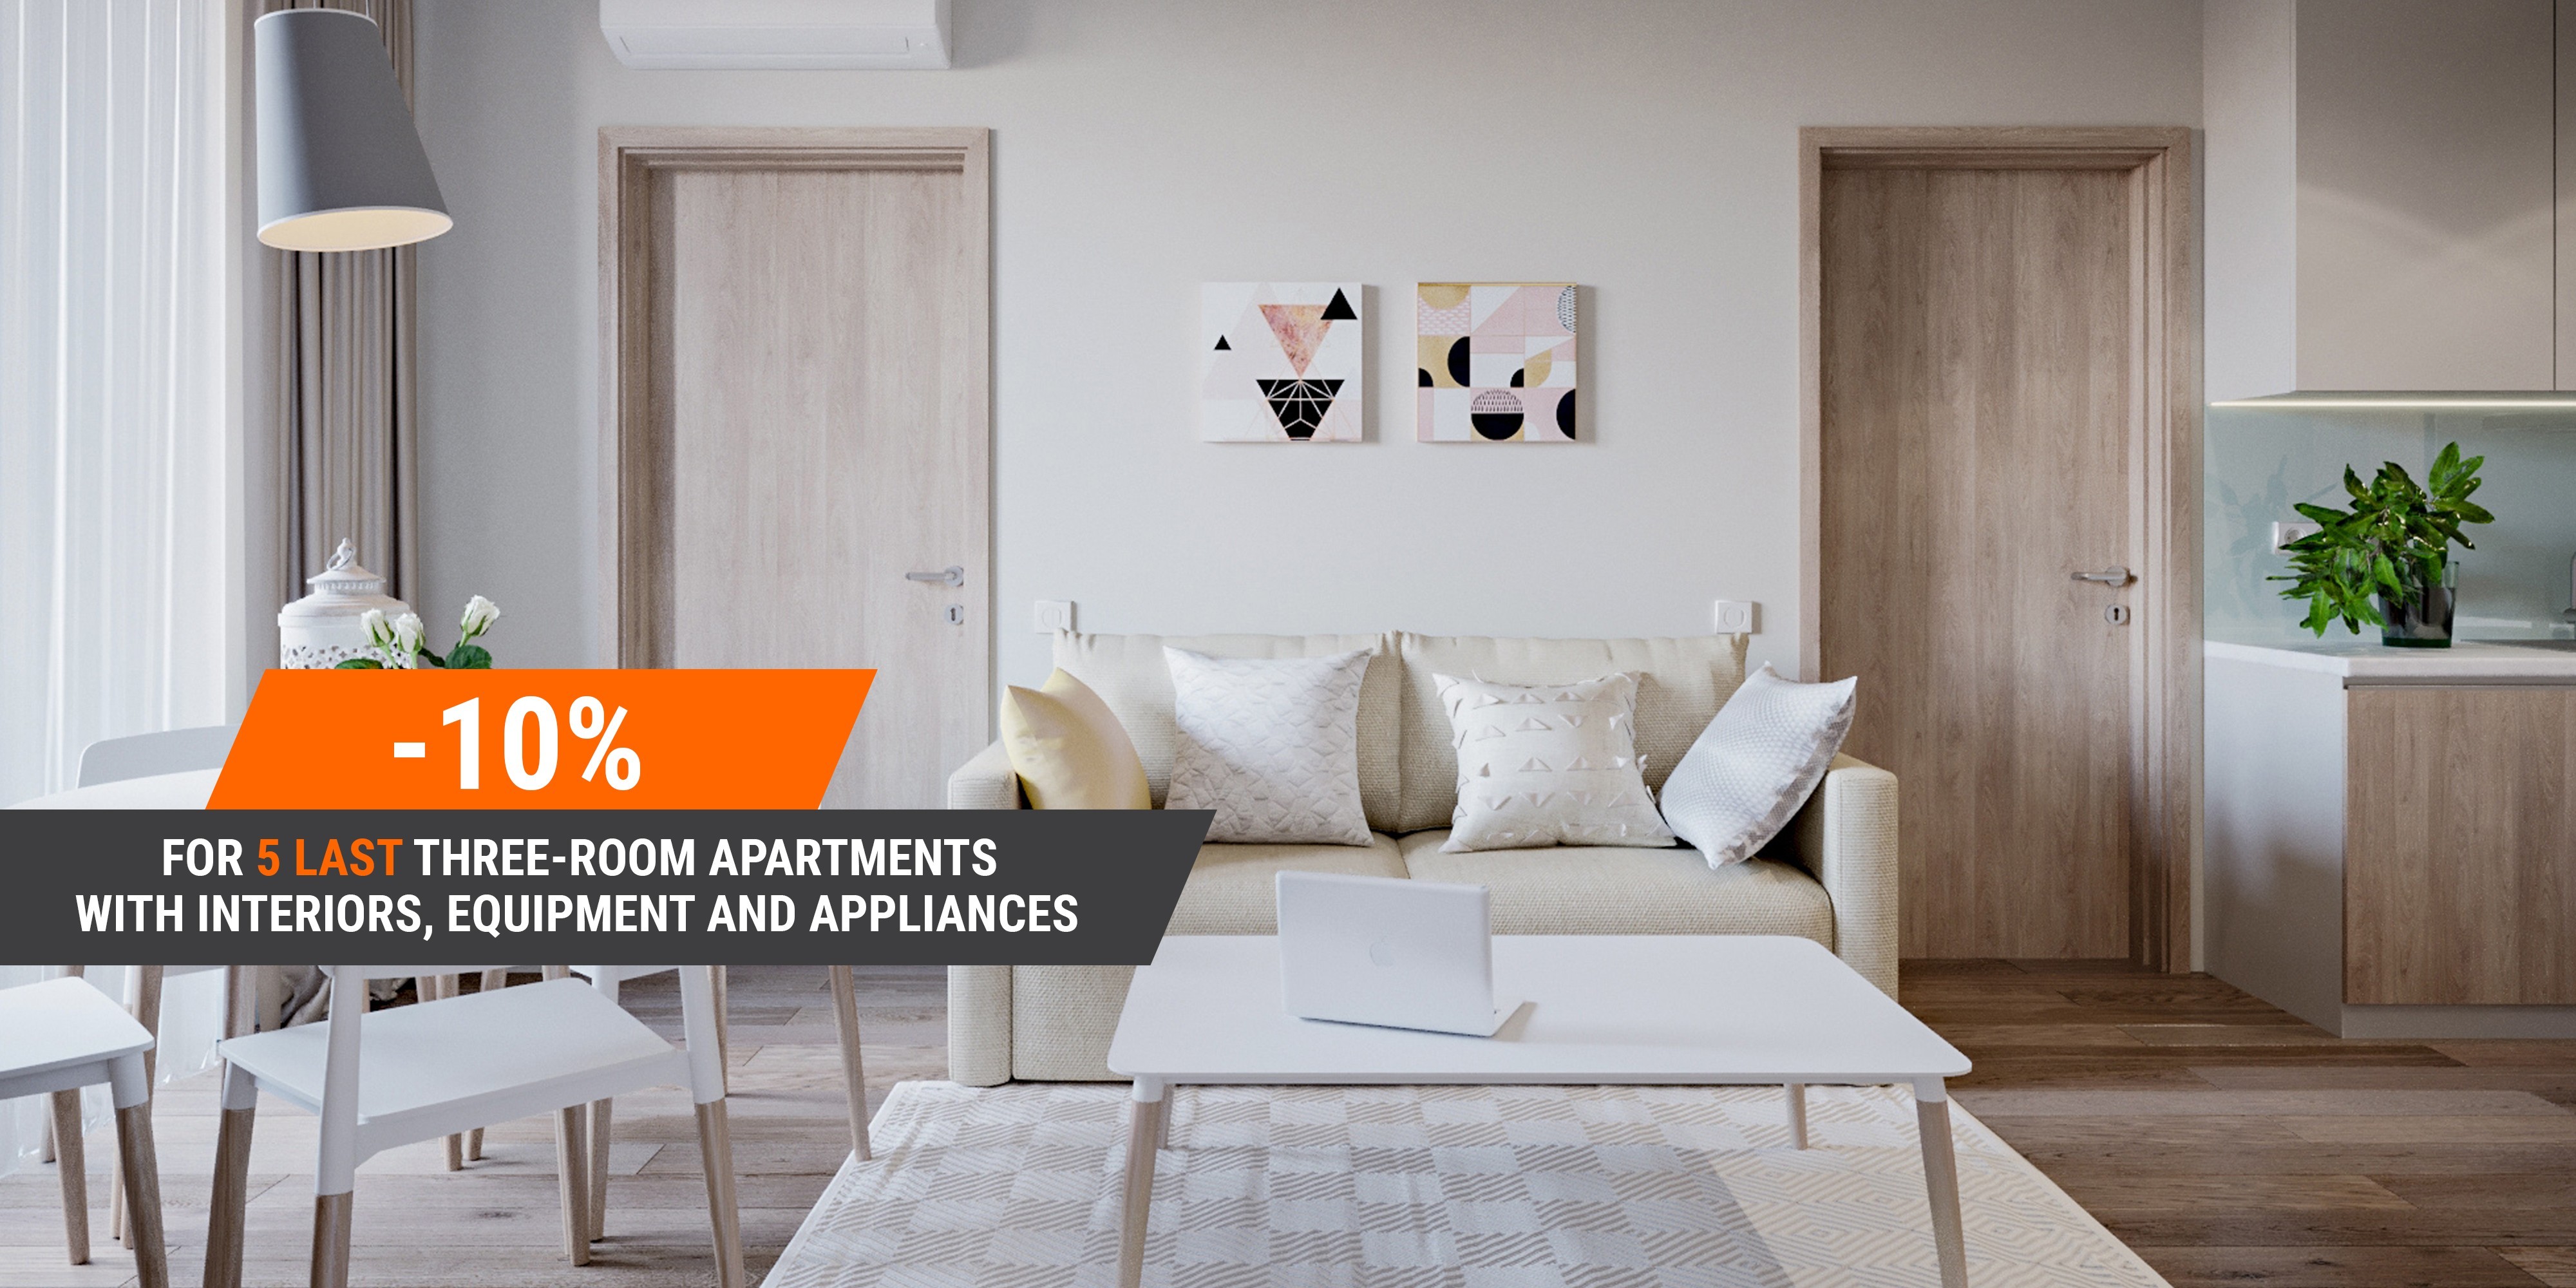 LAST 5 APARTMENTS OFFER FROM STANDARD ONE !